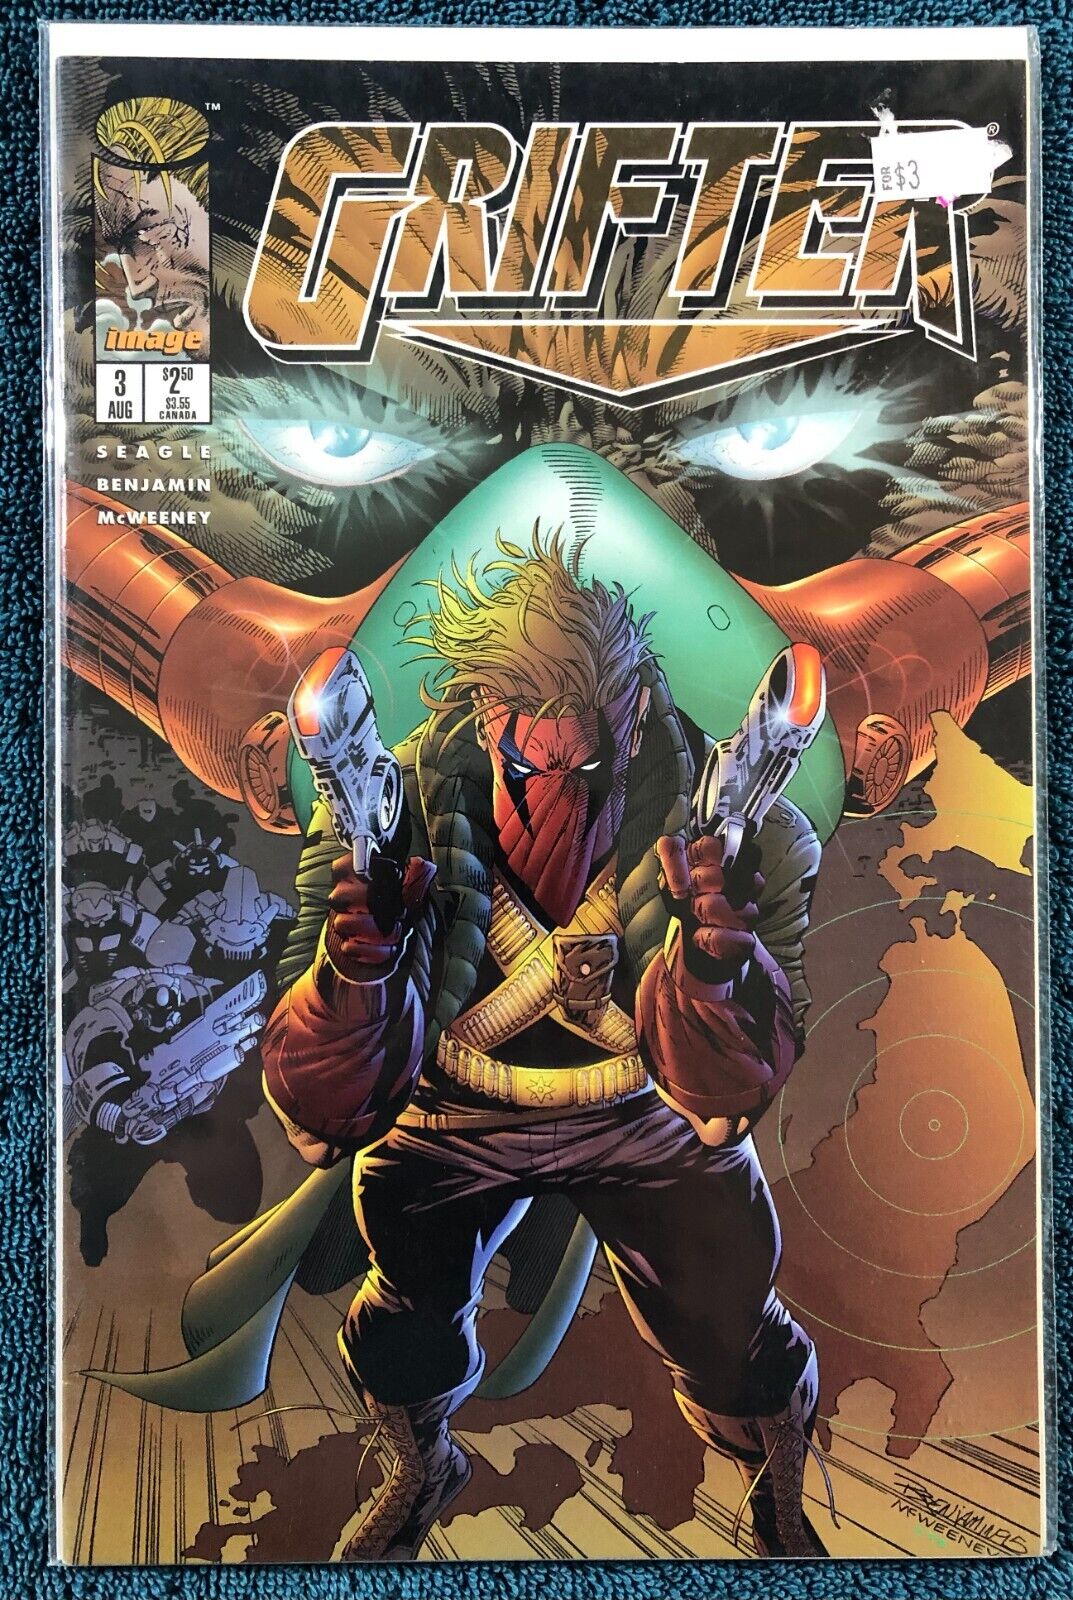 Grifter #3 Image Comic Book VF/NM